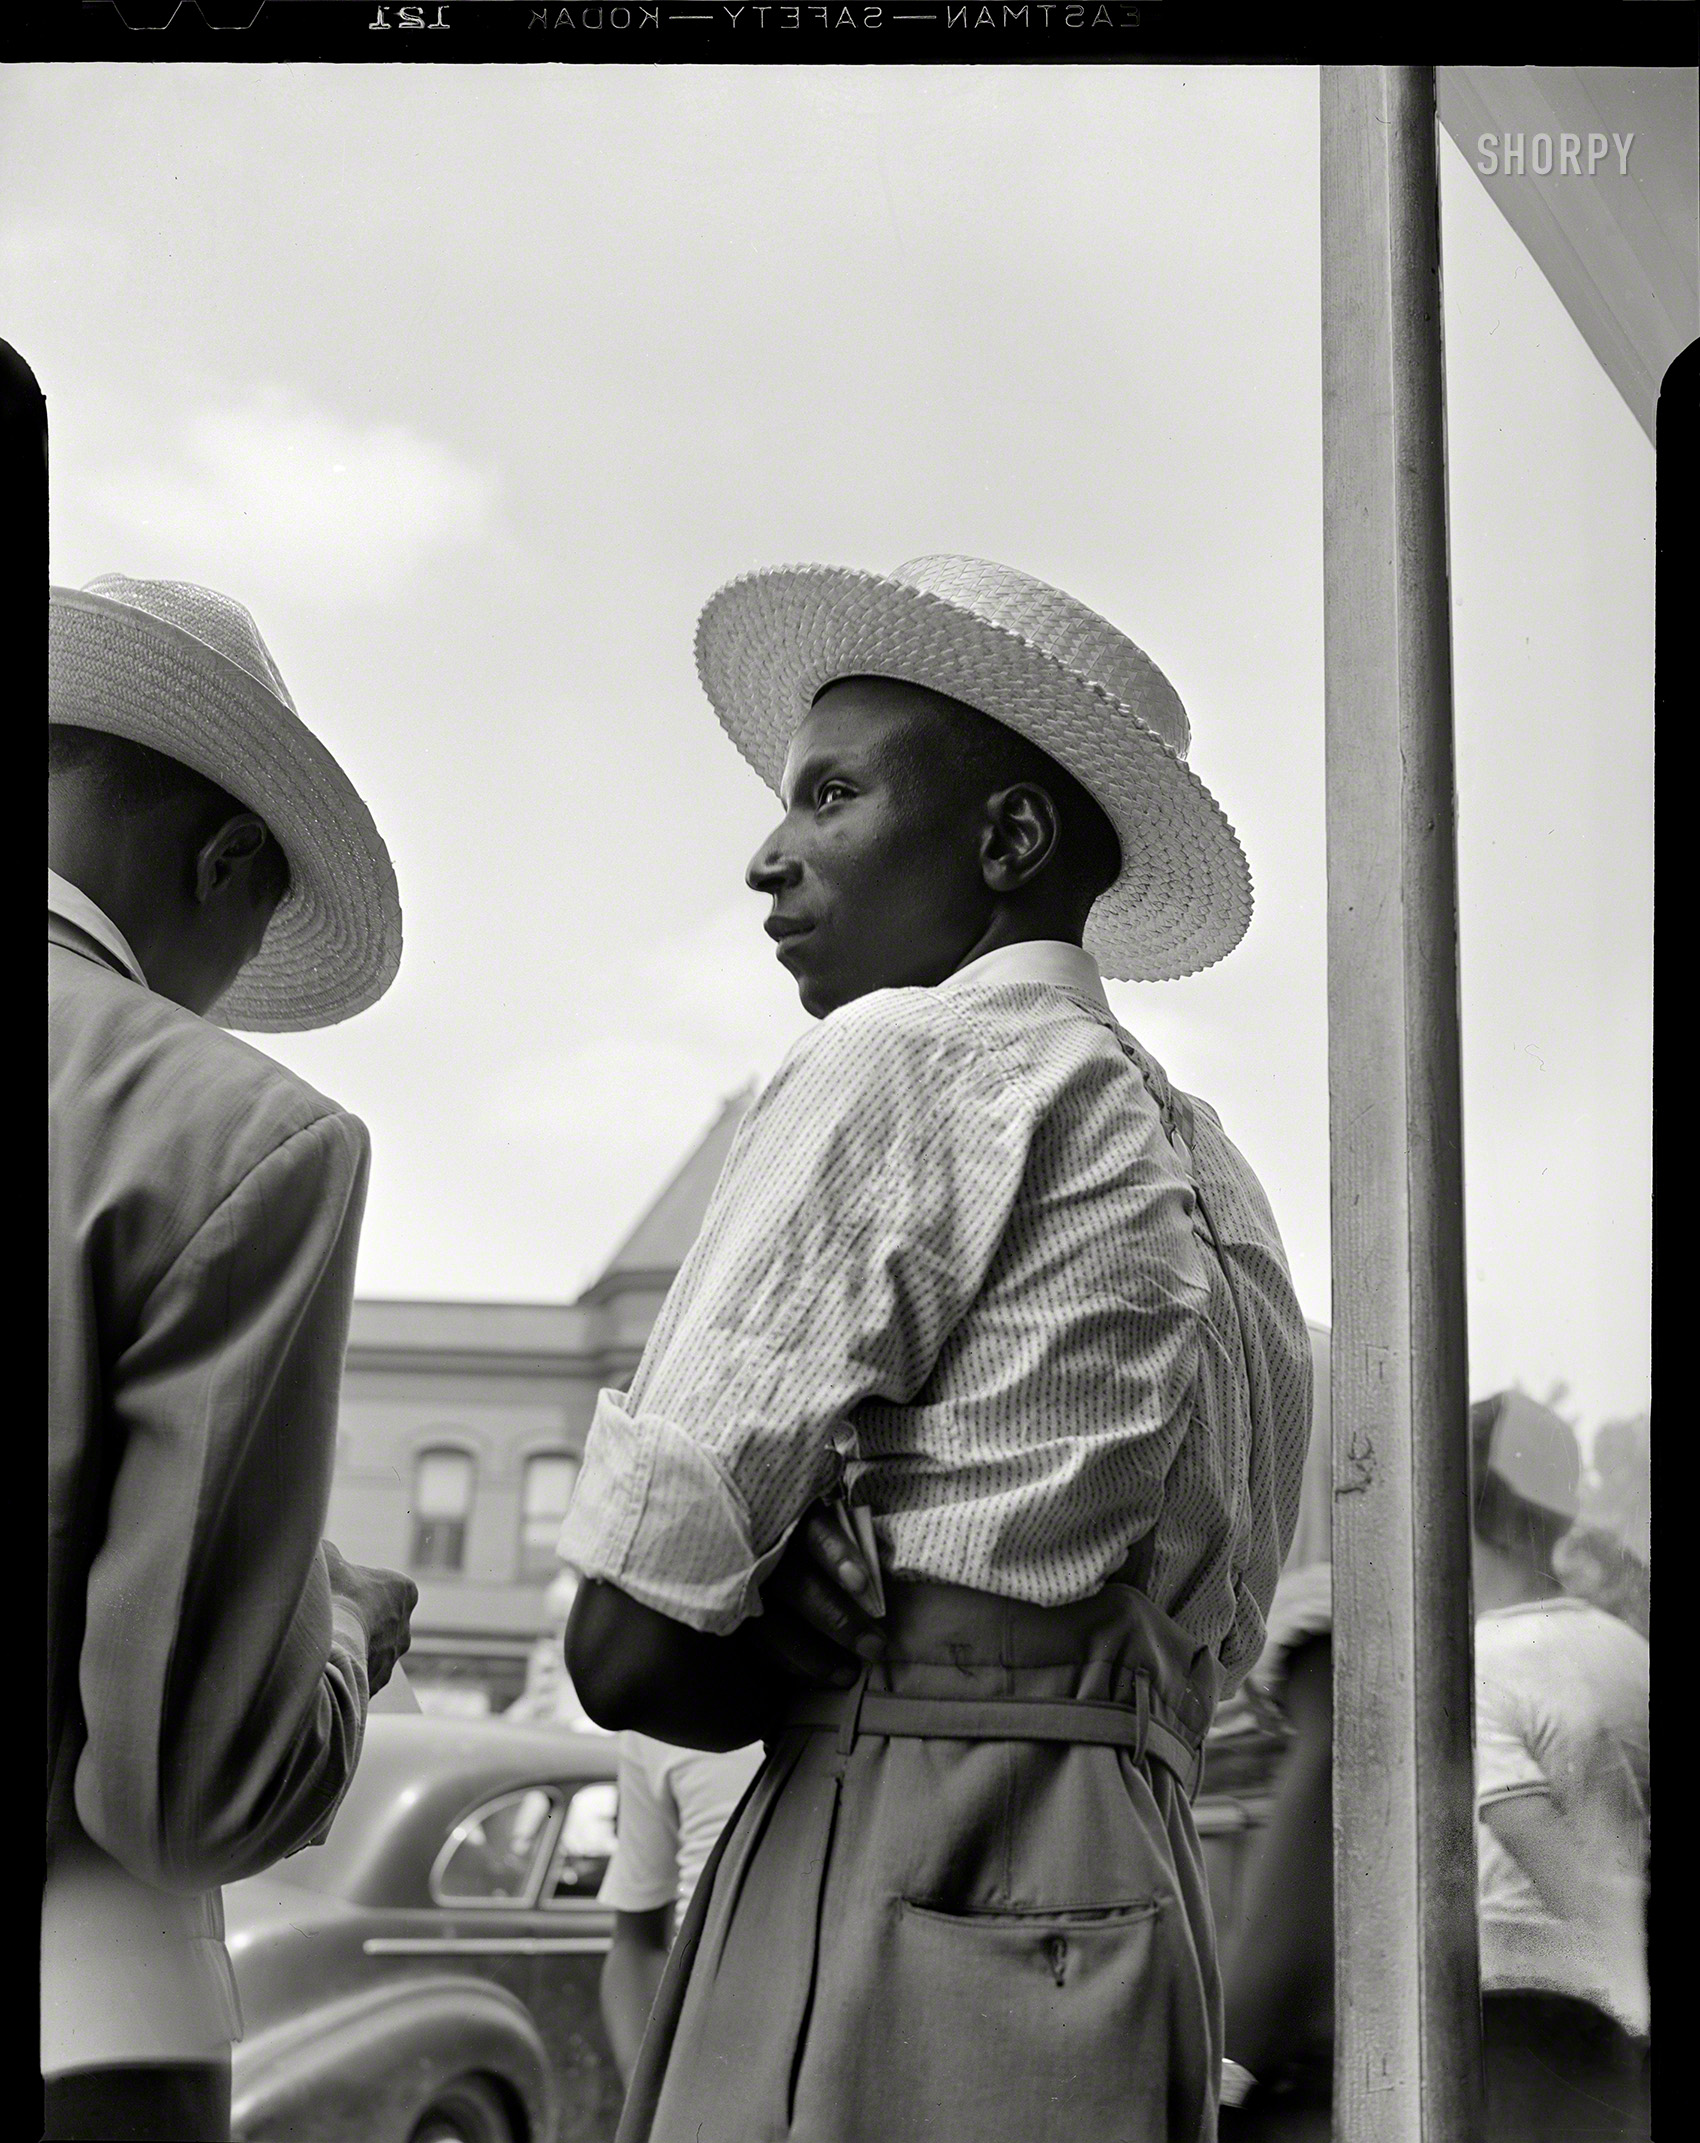 August 1942. Washington, D.C. "Saturday afternoon, Seventh Street and Florida Avenue N.W." Photo by Gordon Parks, Office of War Information. View full size.